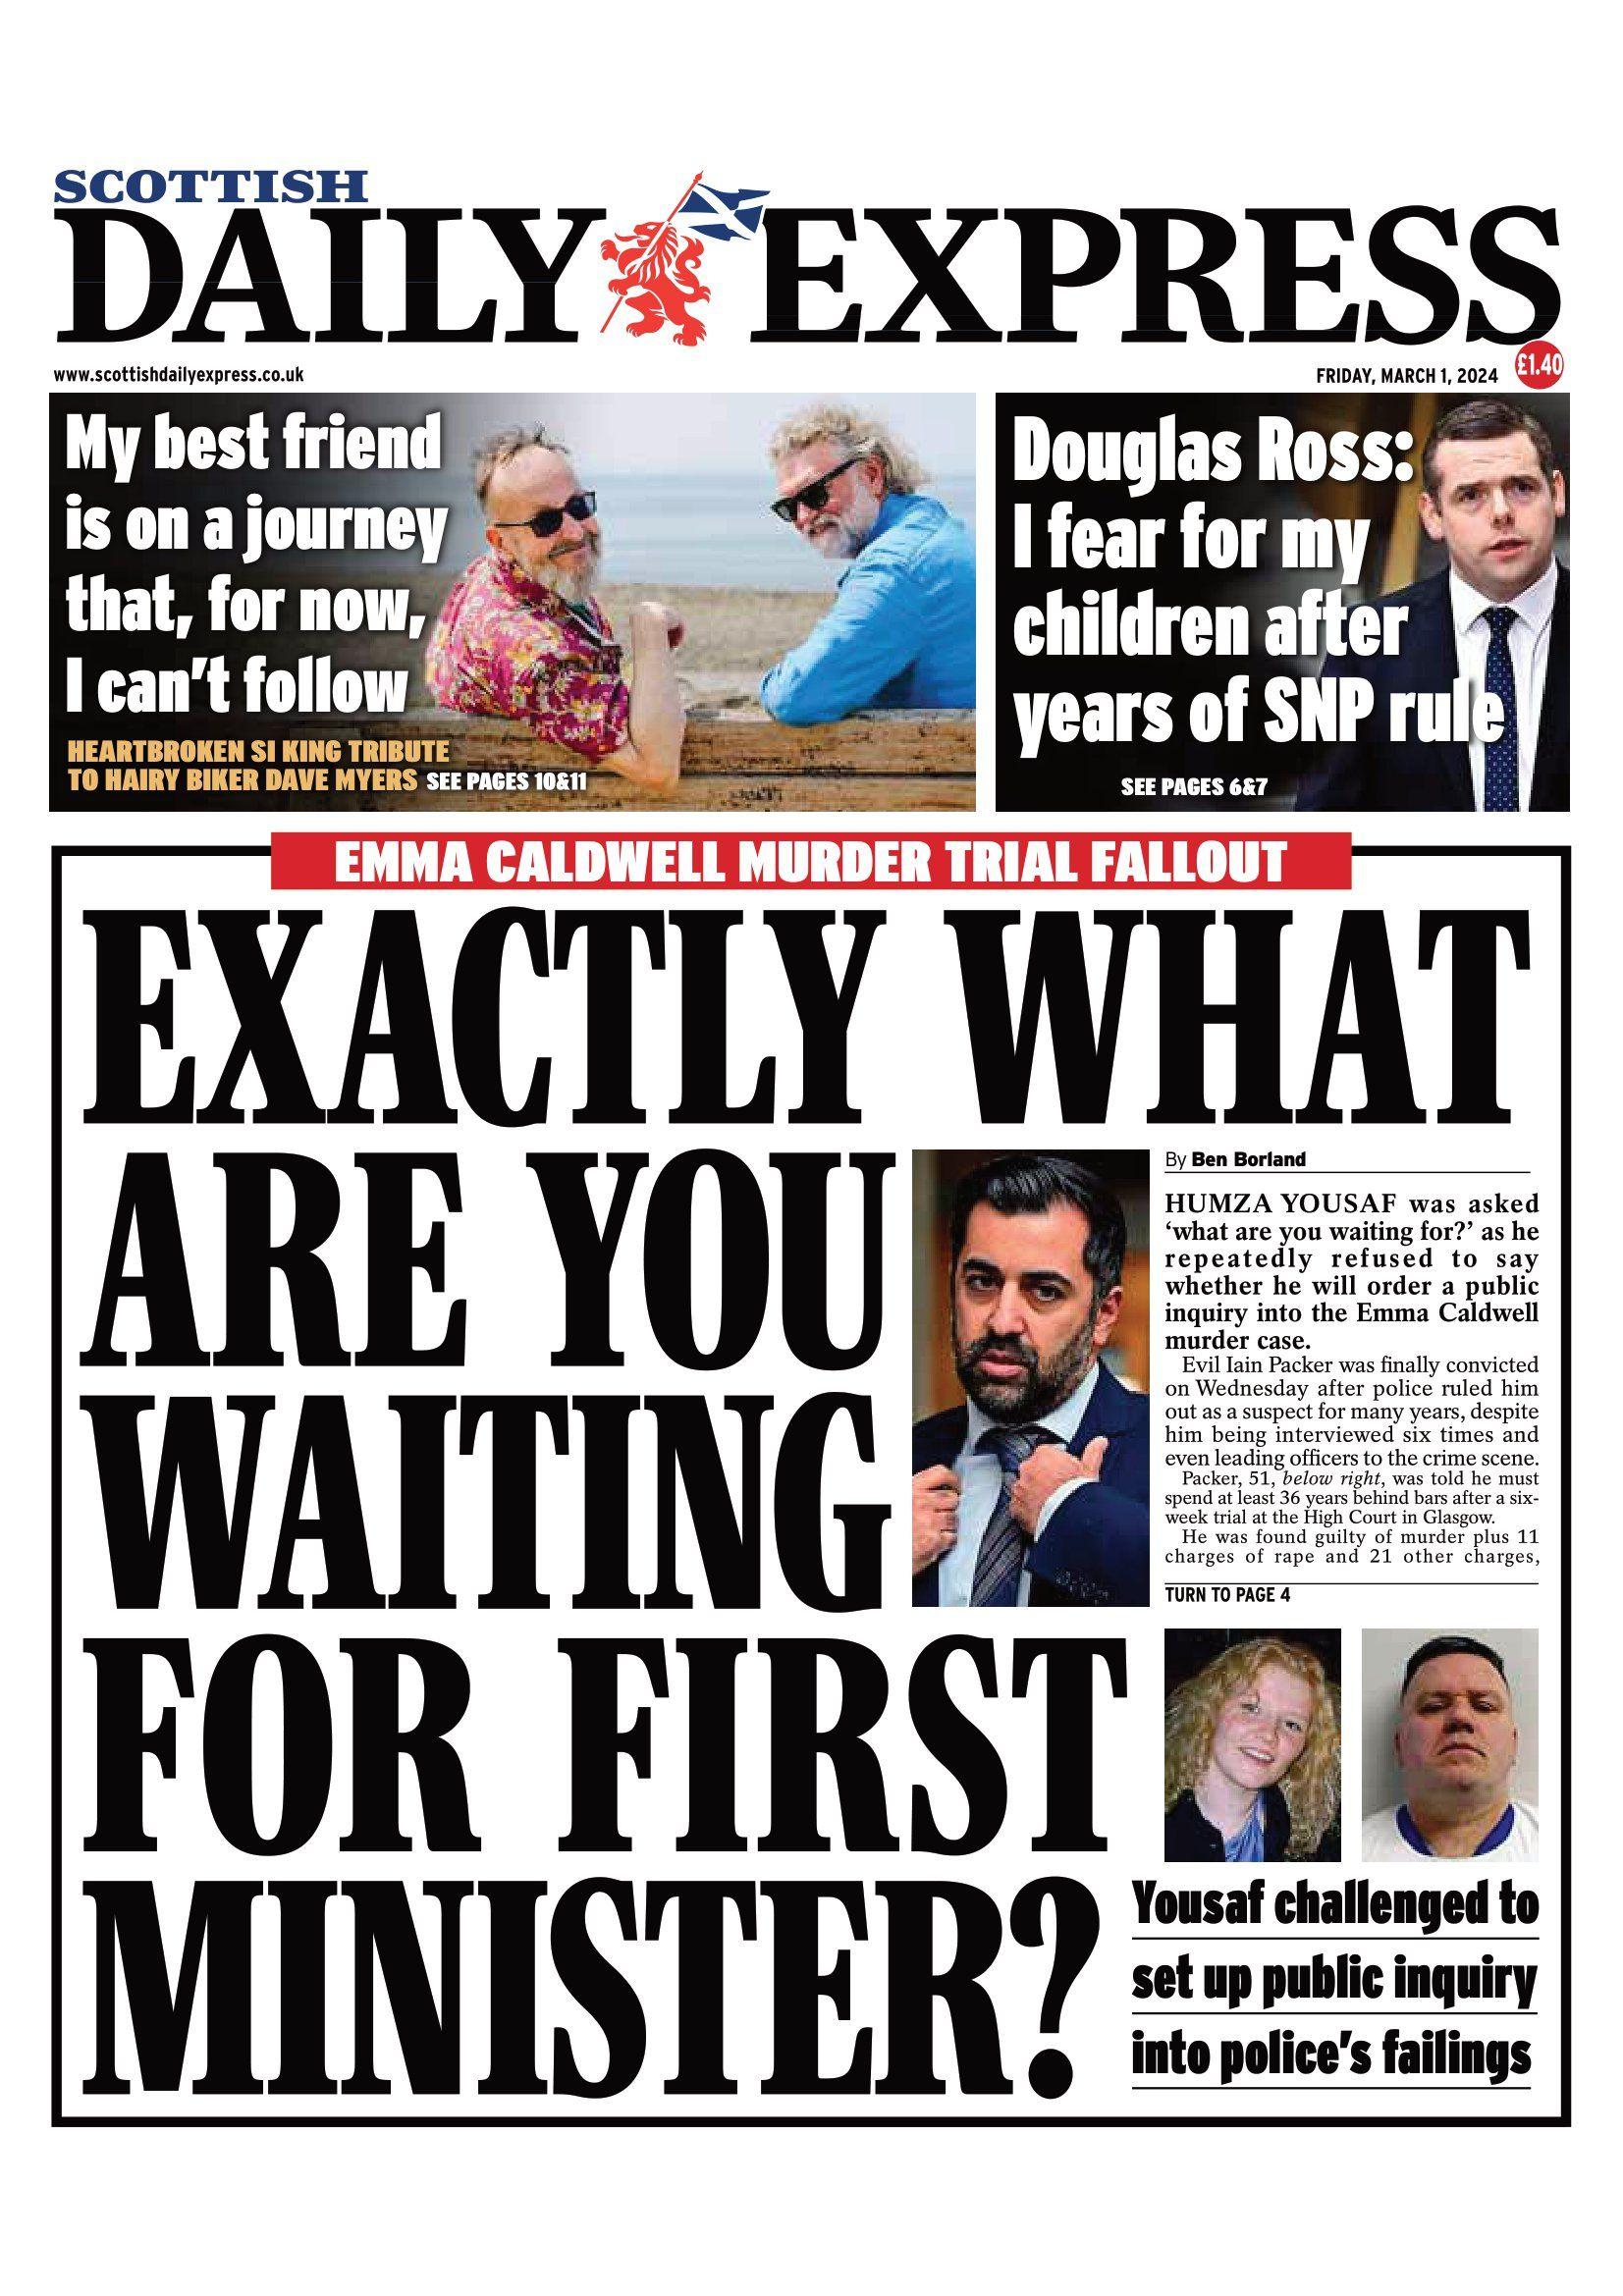 scotland's papers: calls for emma inquiry and ross fears for family